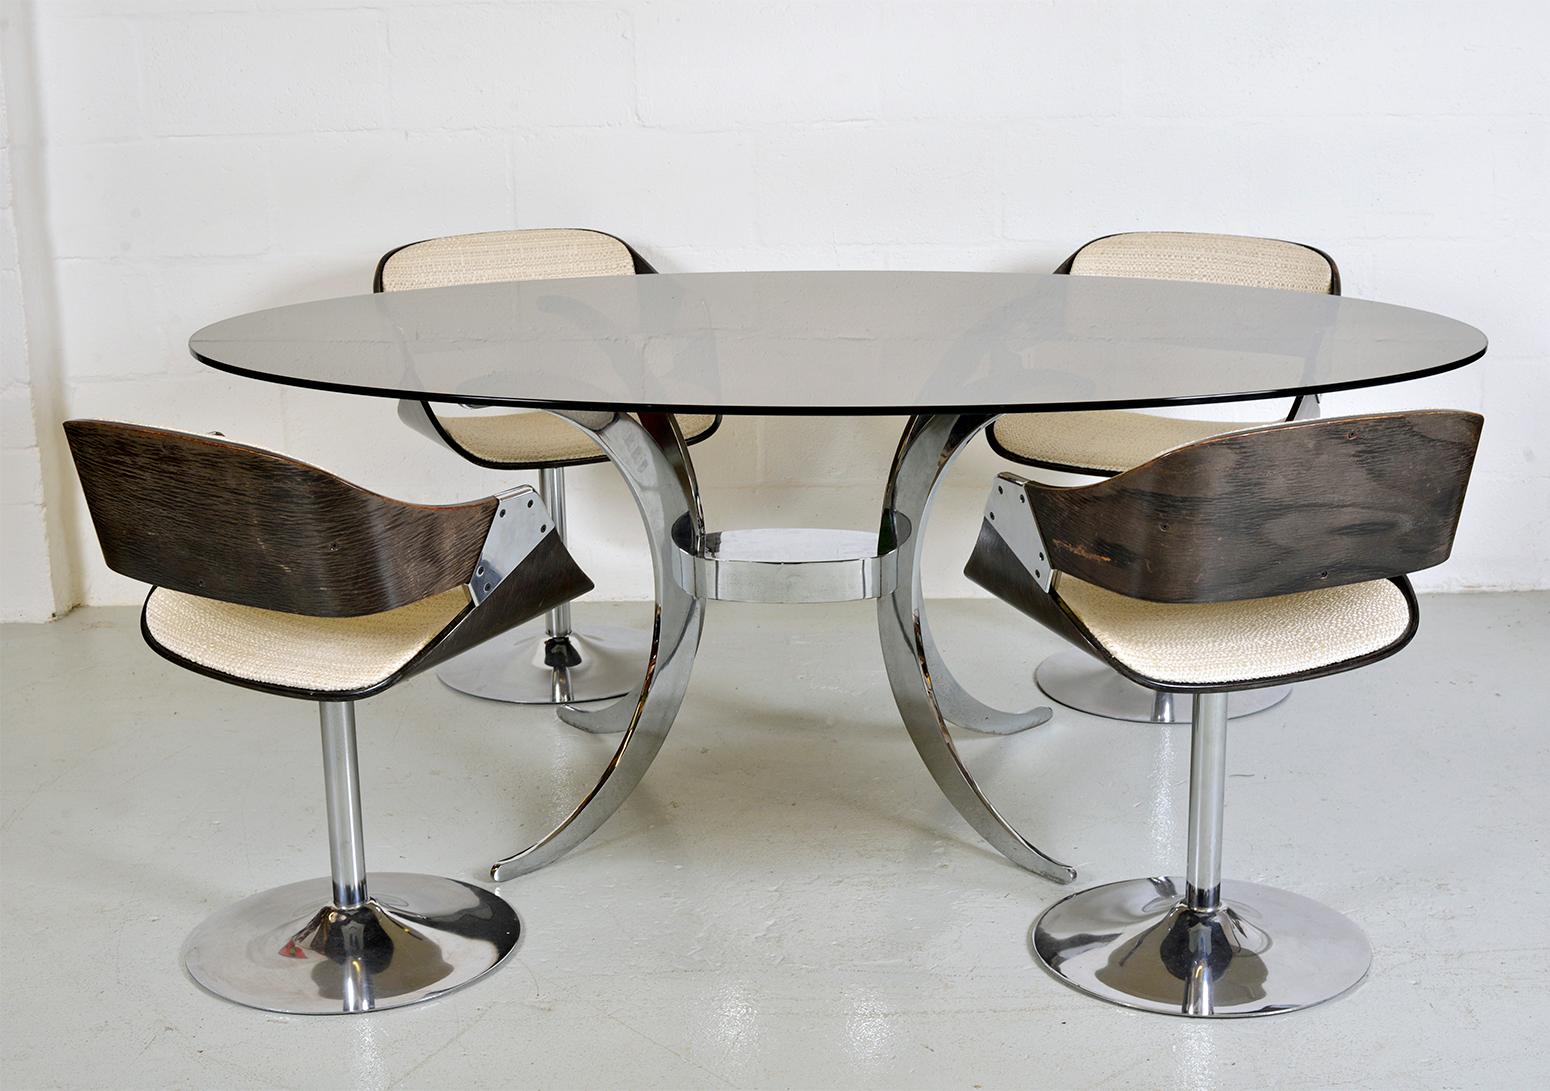 A seriously stylish 1970s Roche Bobois dining suite comprising of a table and four chairs bought from the south of France. An oval smoked glass top sits upon an elegant, and heavy-duty central chrome base, where four moon-shaped legs stem from a